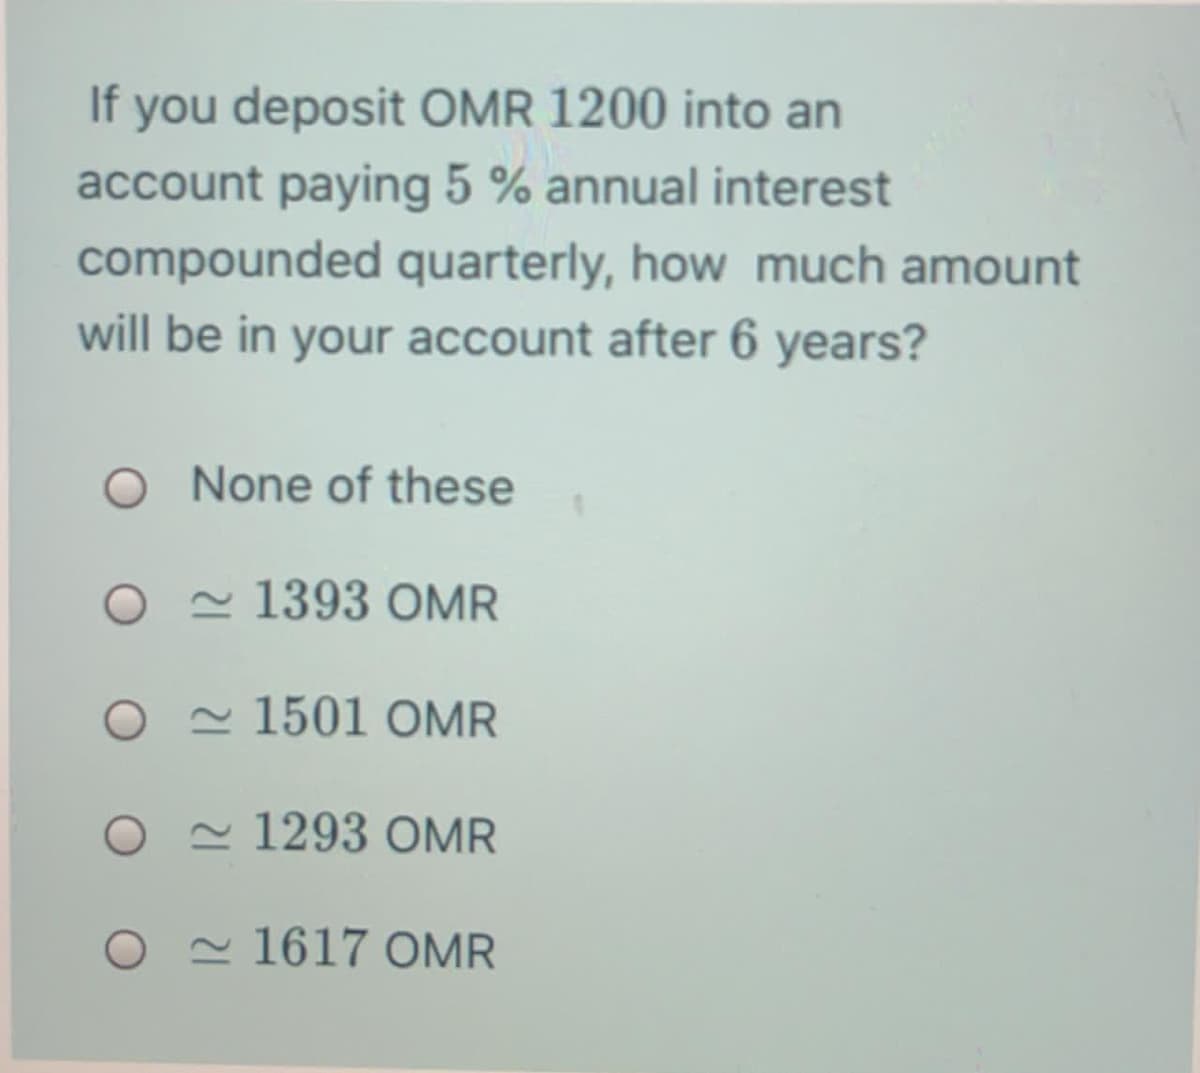 If you deposit OMR 1200 into an
account paying 5 % annual interest
compounded quarterly, how much amount
will be in your account after 6 years?
O None of these
O - 1393 OMR
O - 1501 OMR
O - 1293 OMR
O - 1617 OMR
